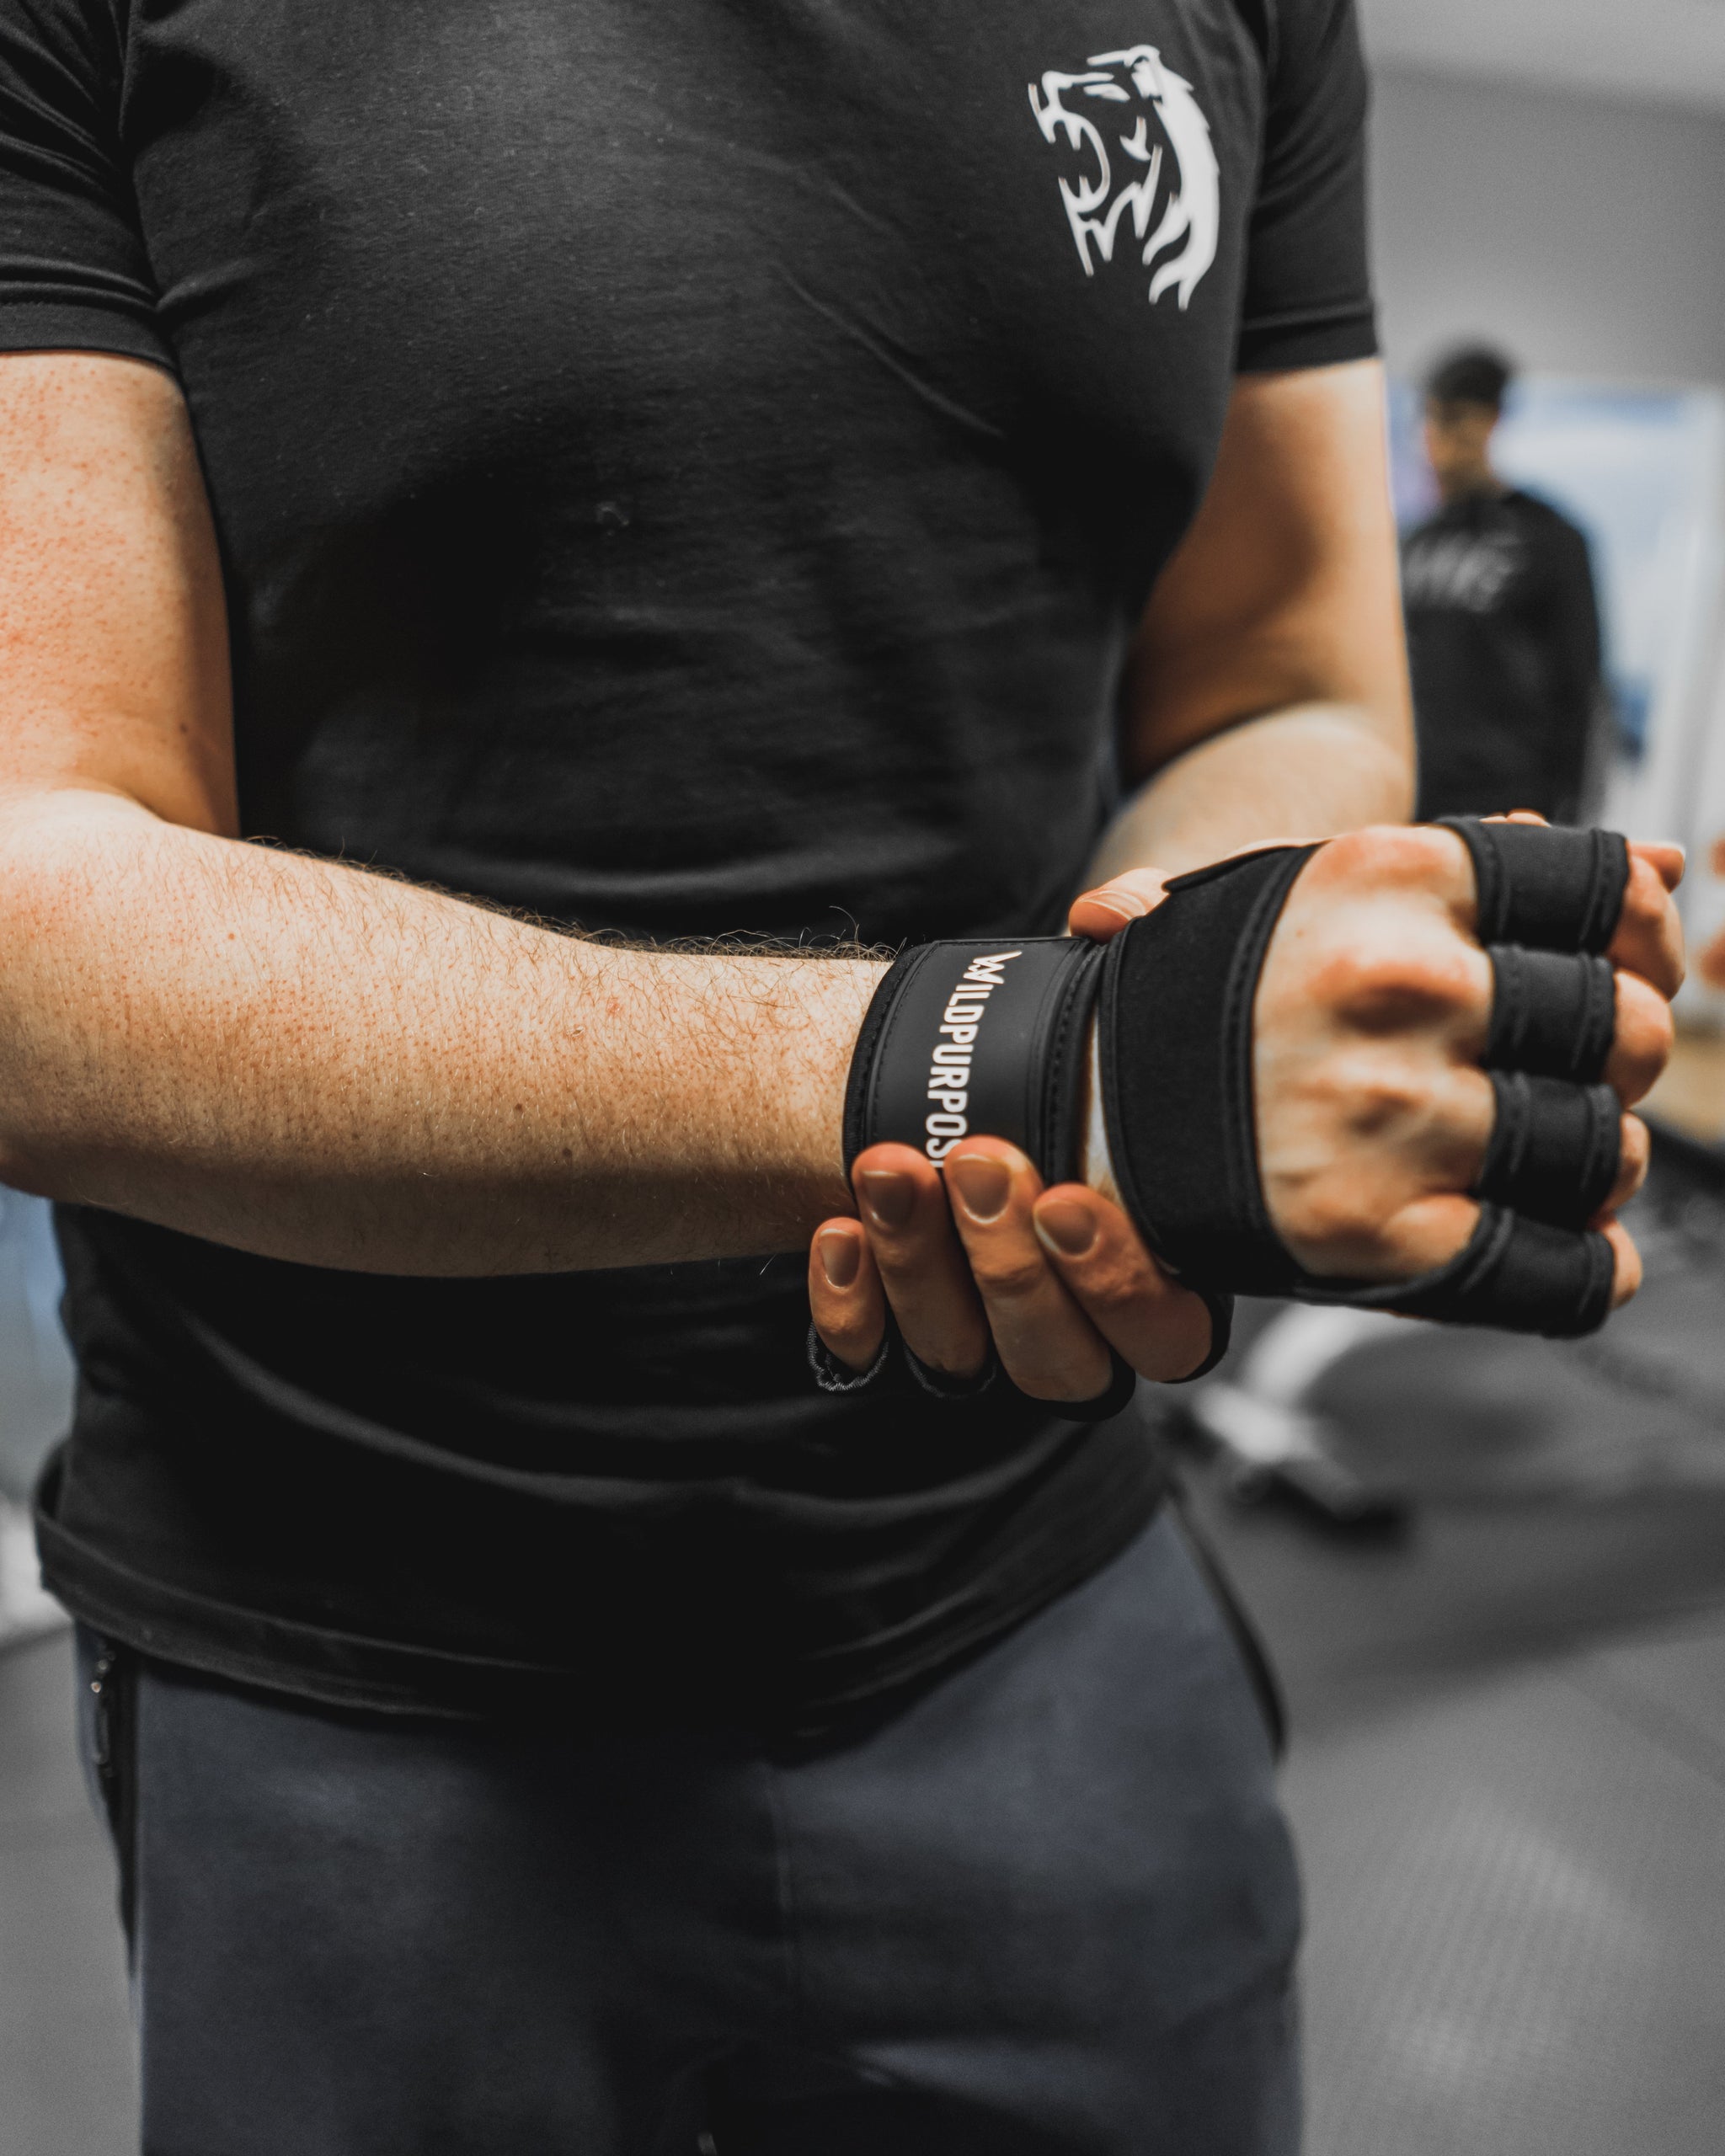 Easy Bicep Curl Fix For Bigger Biceps, Purpose Gloves